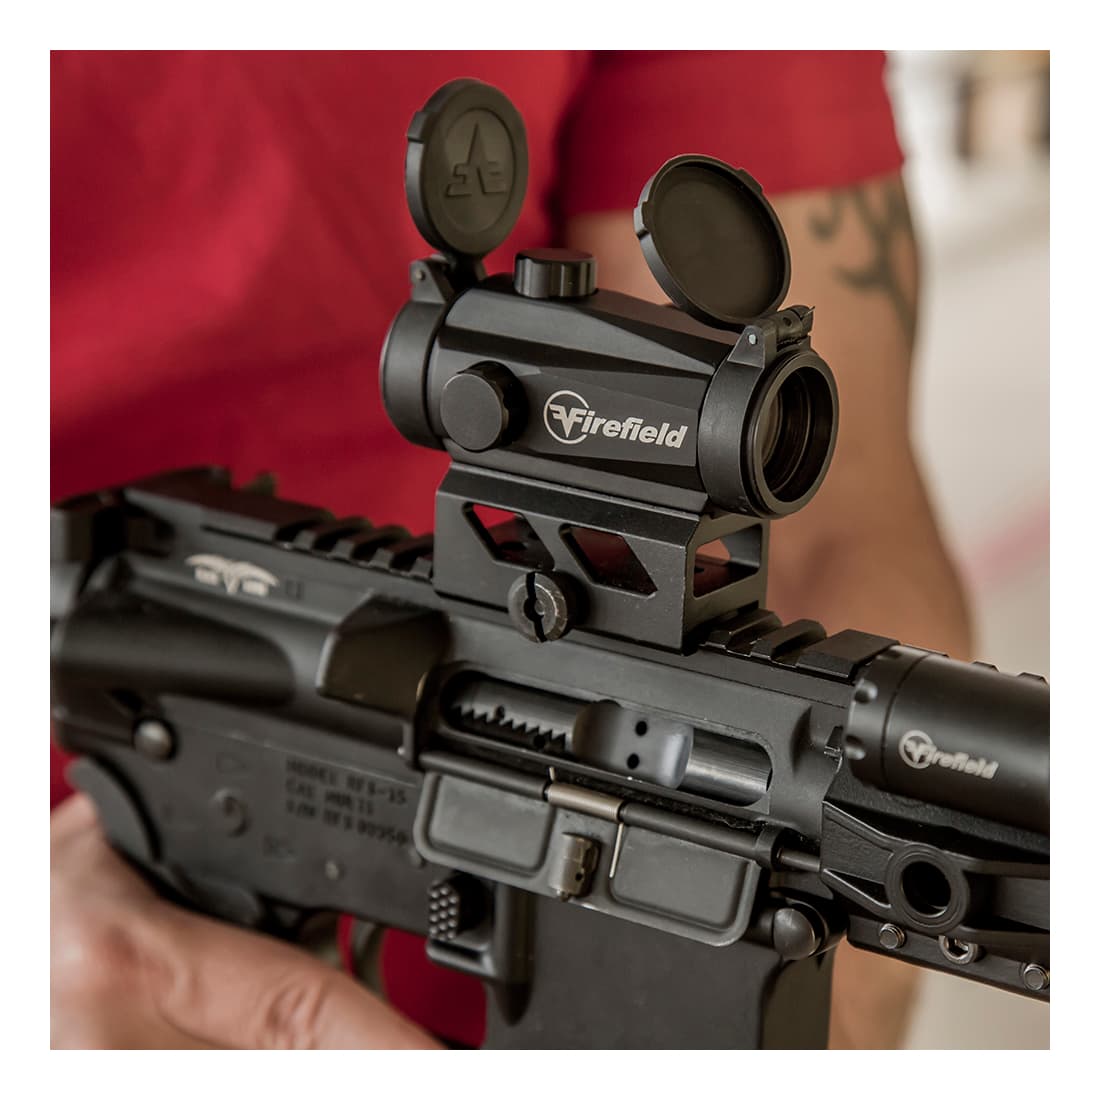 Firefield® Impulse 1x22 Compact Red Dot Sight - In the Field